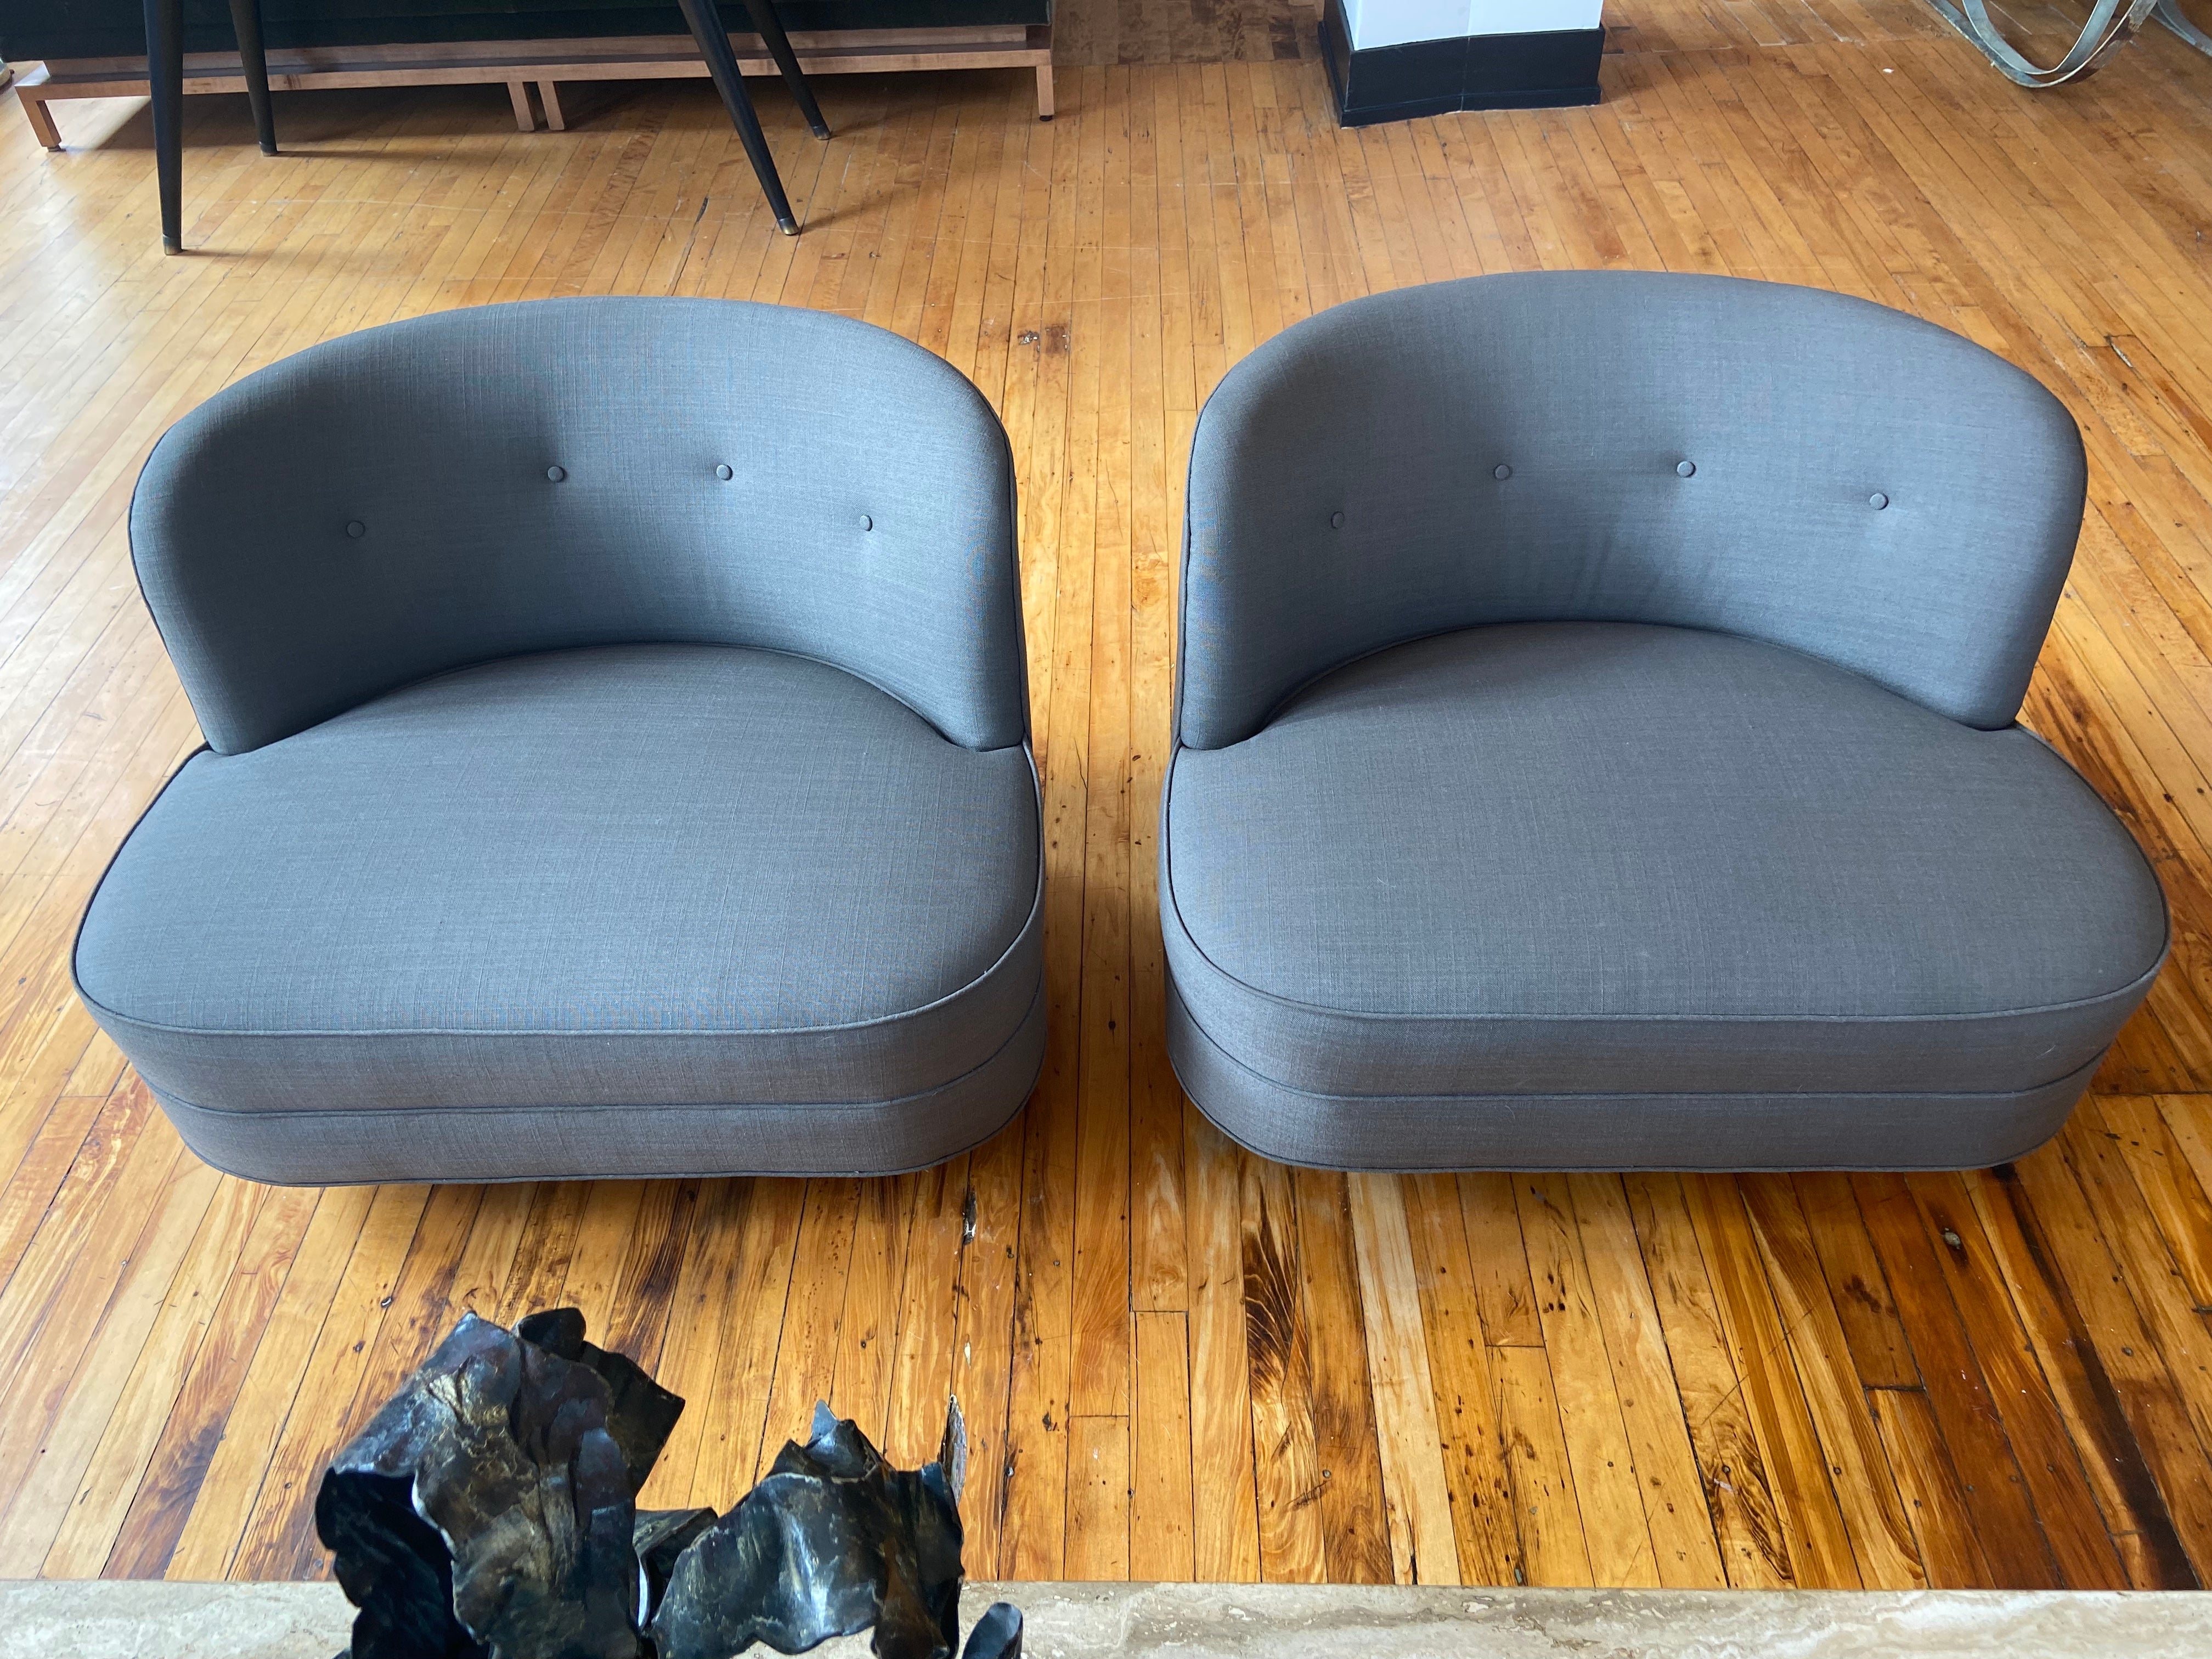 Pair of low lounge chairs with elegantly curved backs, circa mid-20th century designed by Gilbert Rhode. Rhode who is famously known for his modern design which he introduced during his time at Herman Miller Inc. 

This pair of slipper low lounge